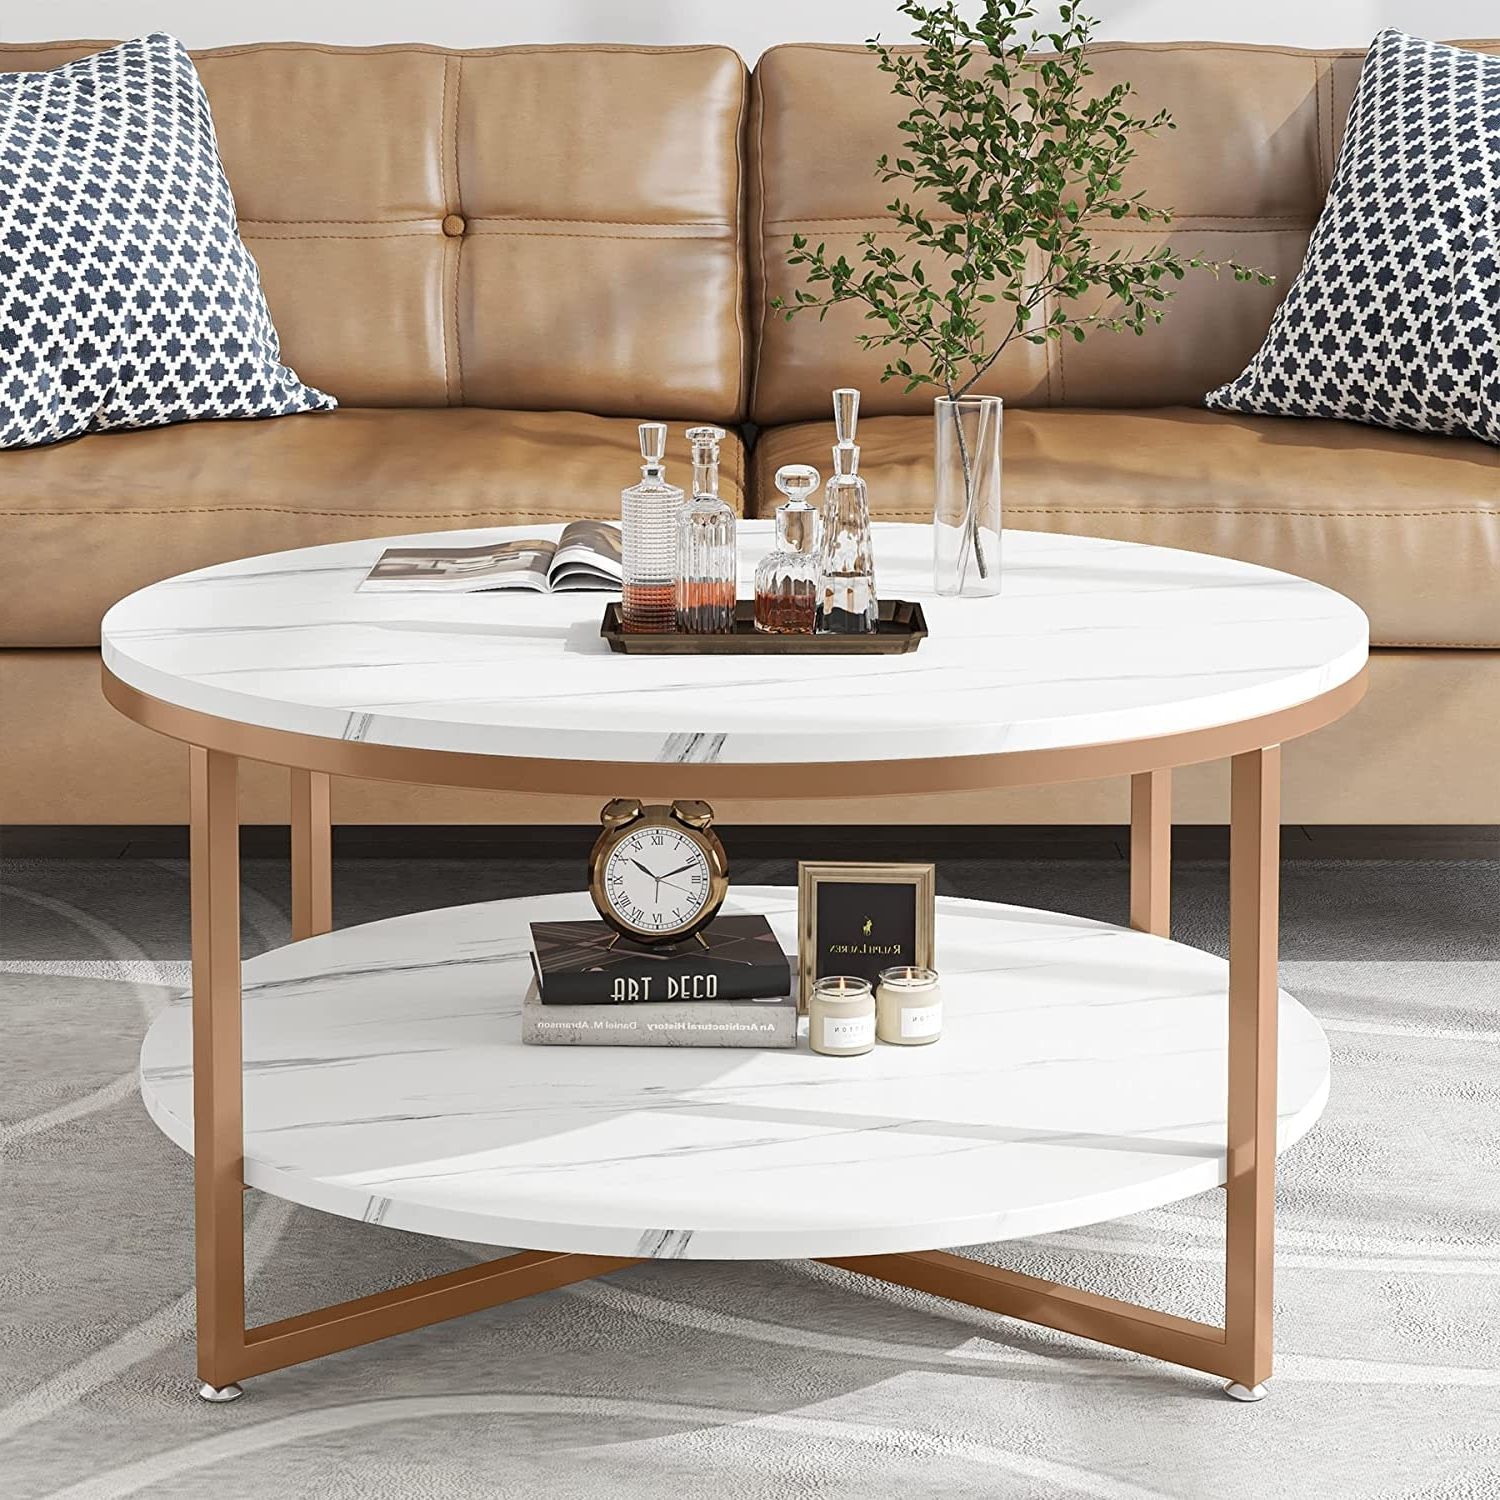 Most Popular Two Tier Round Faux Marble Modern Coffee Table With Metal Legs And Open  Storage Shelf For Living Room, White Gold – Bed Bath & Beyond – 37593828 Regarding Coffee Tables With Open Storage Shelves (View 8 of 10)